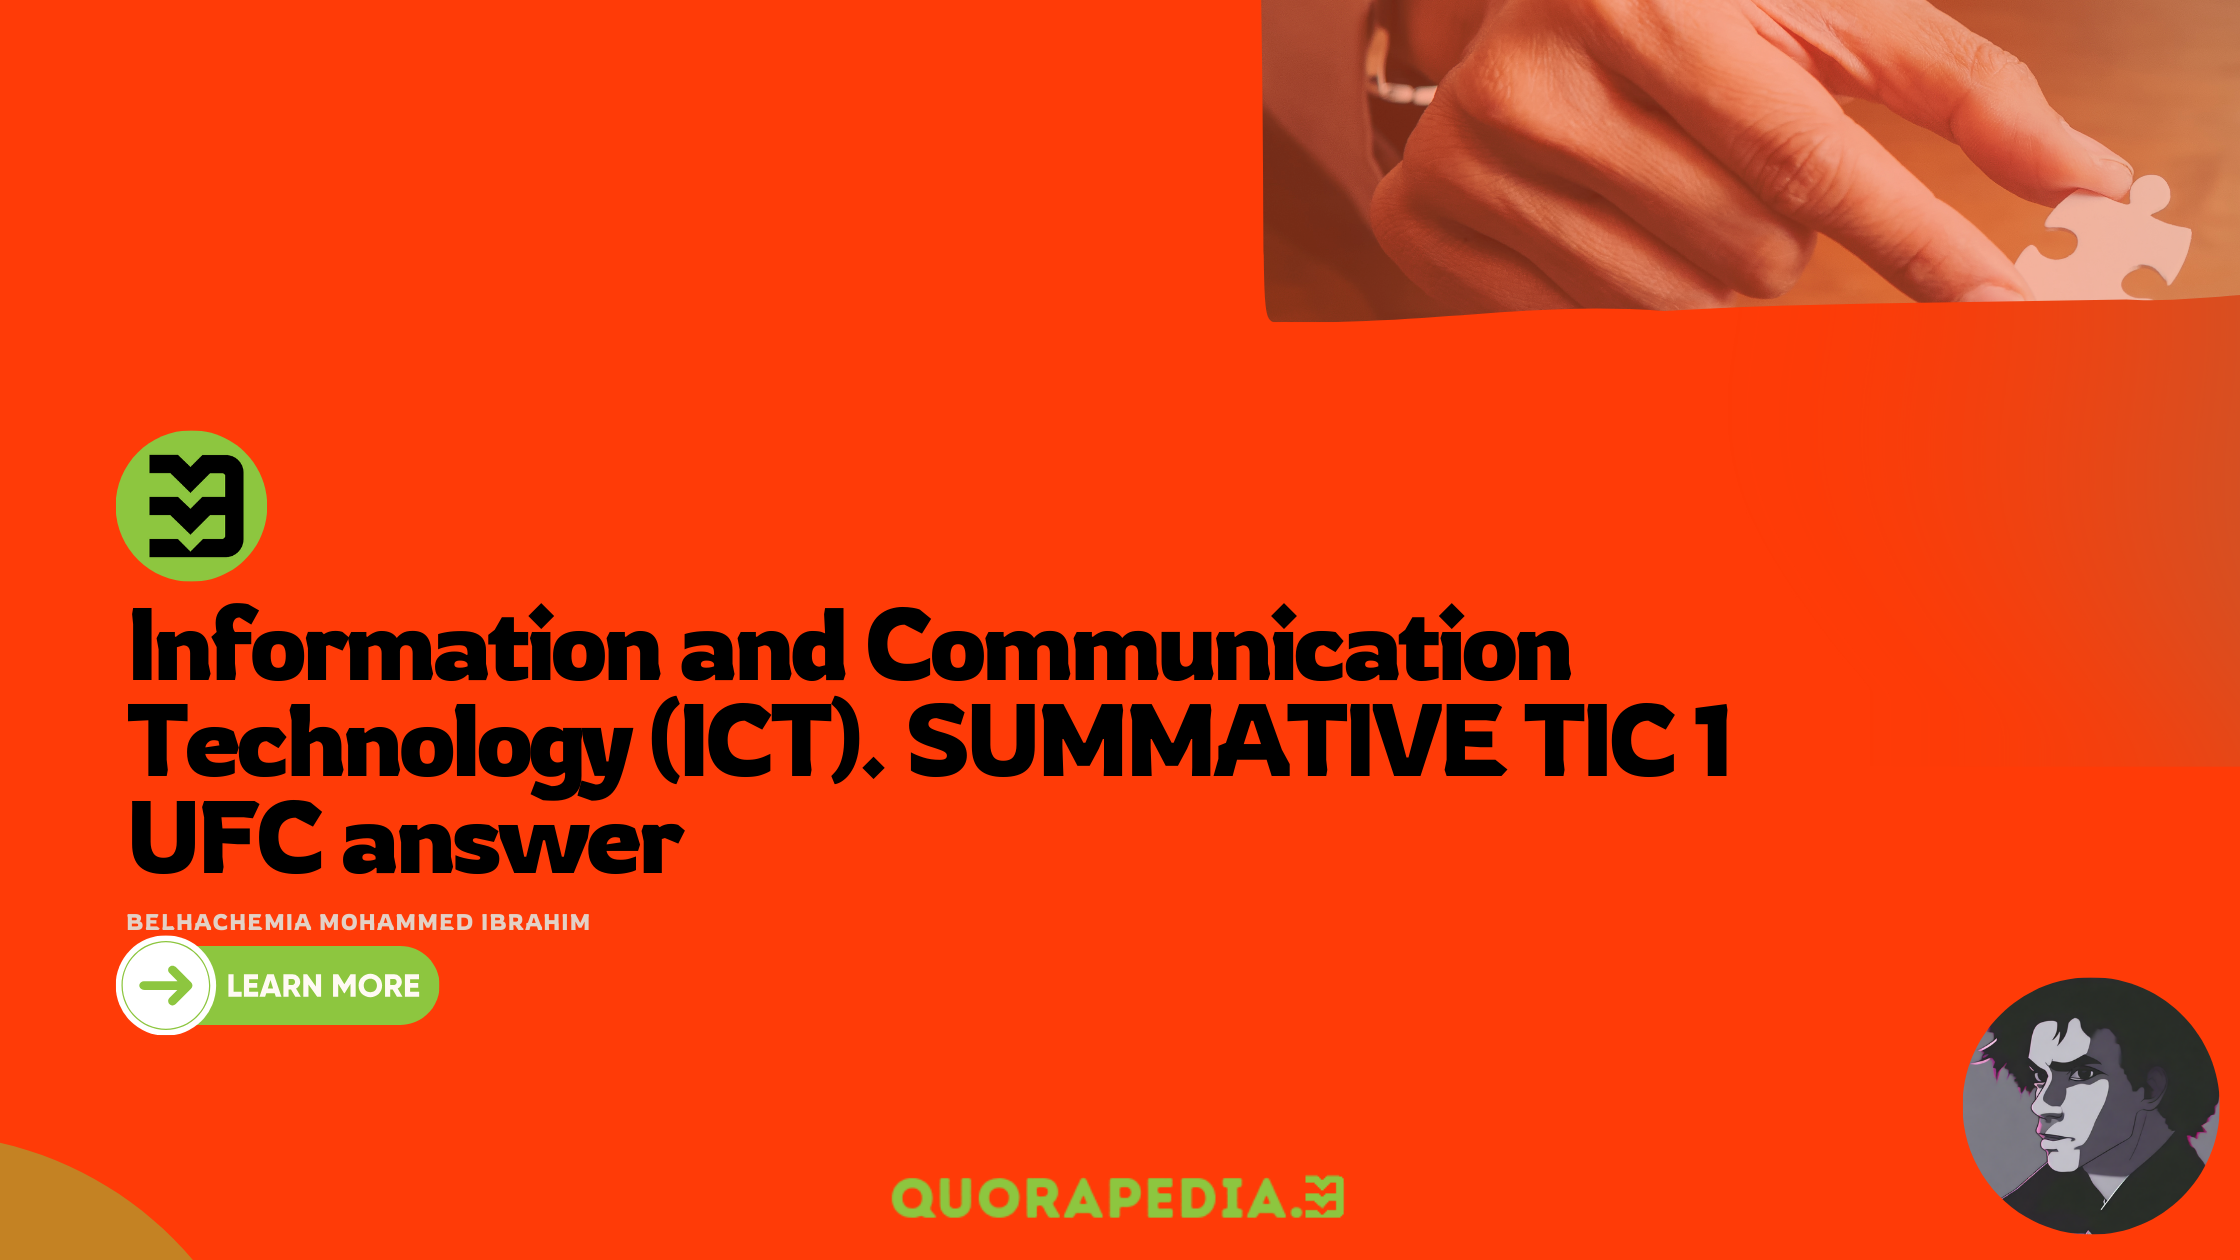 Information and Communication Technology (ICT). SUMMATIVE TIC 1 UFC answer